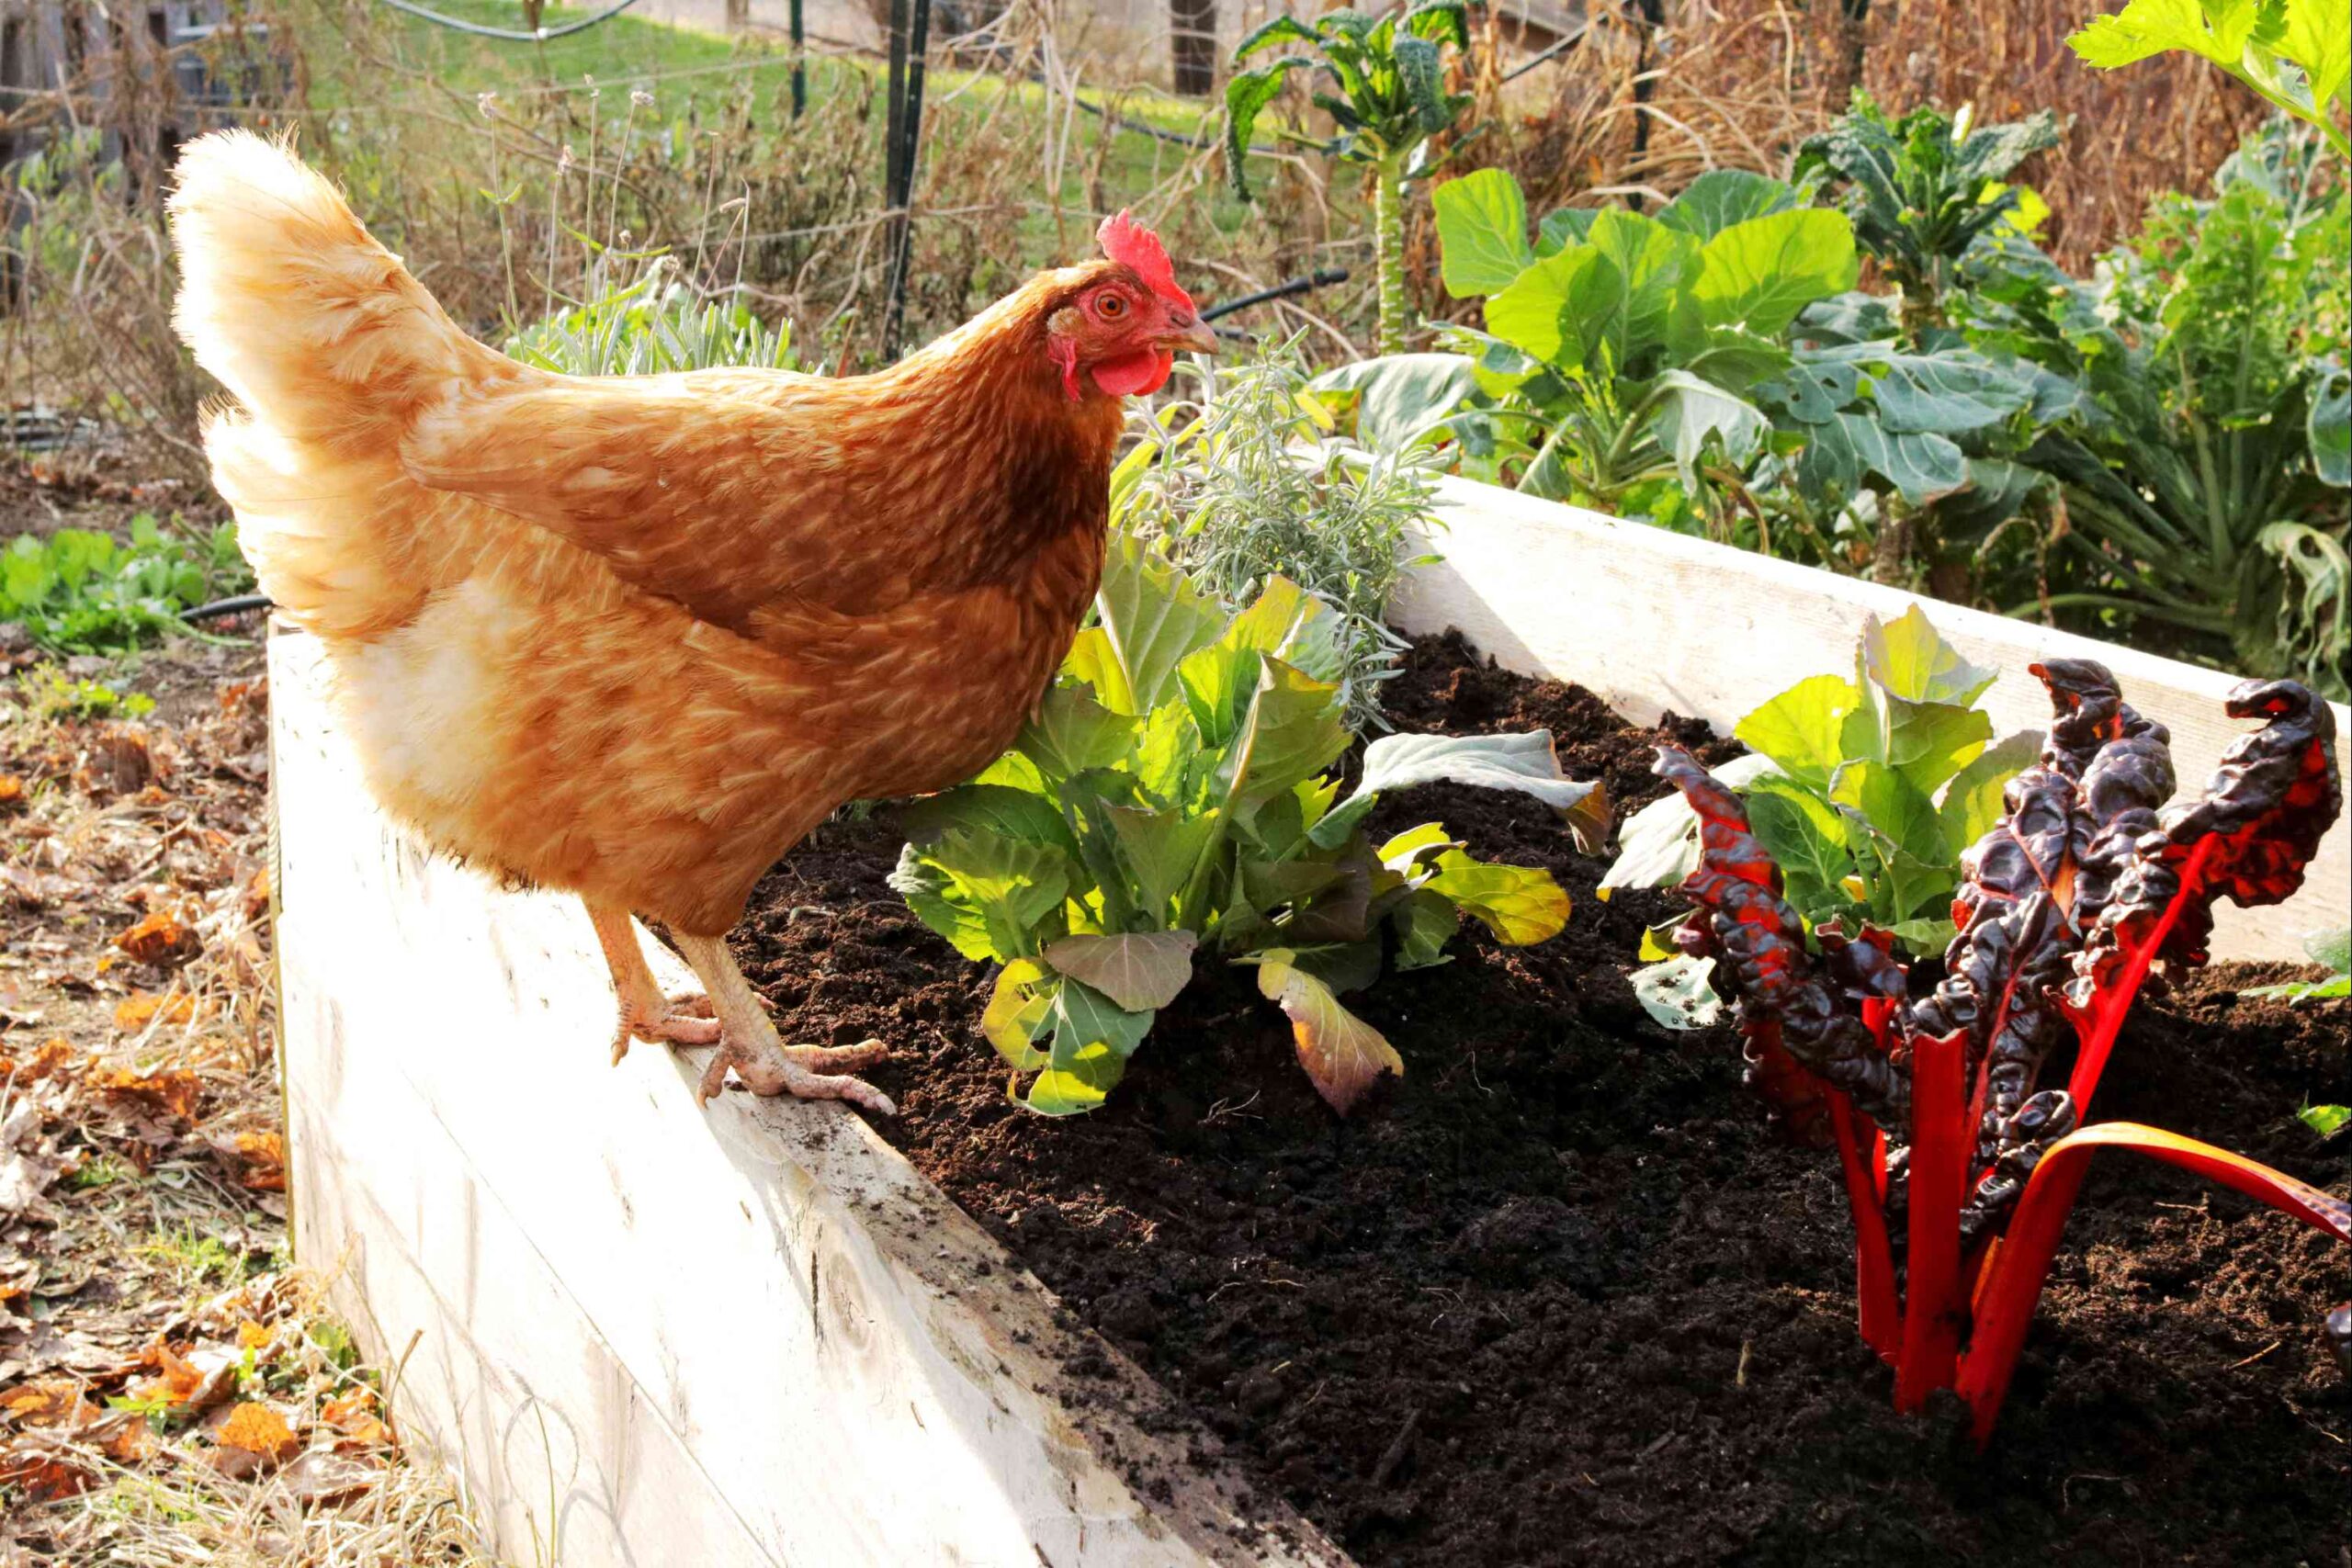 A chicken perched on a plant-filled raised bed